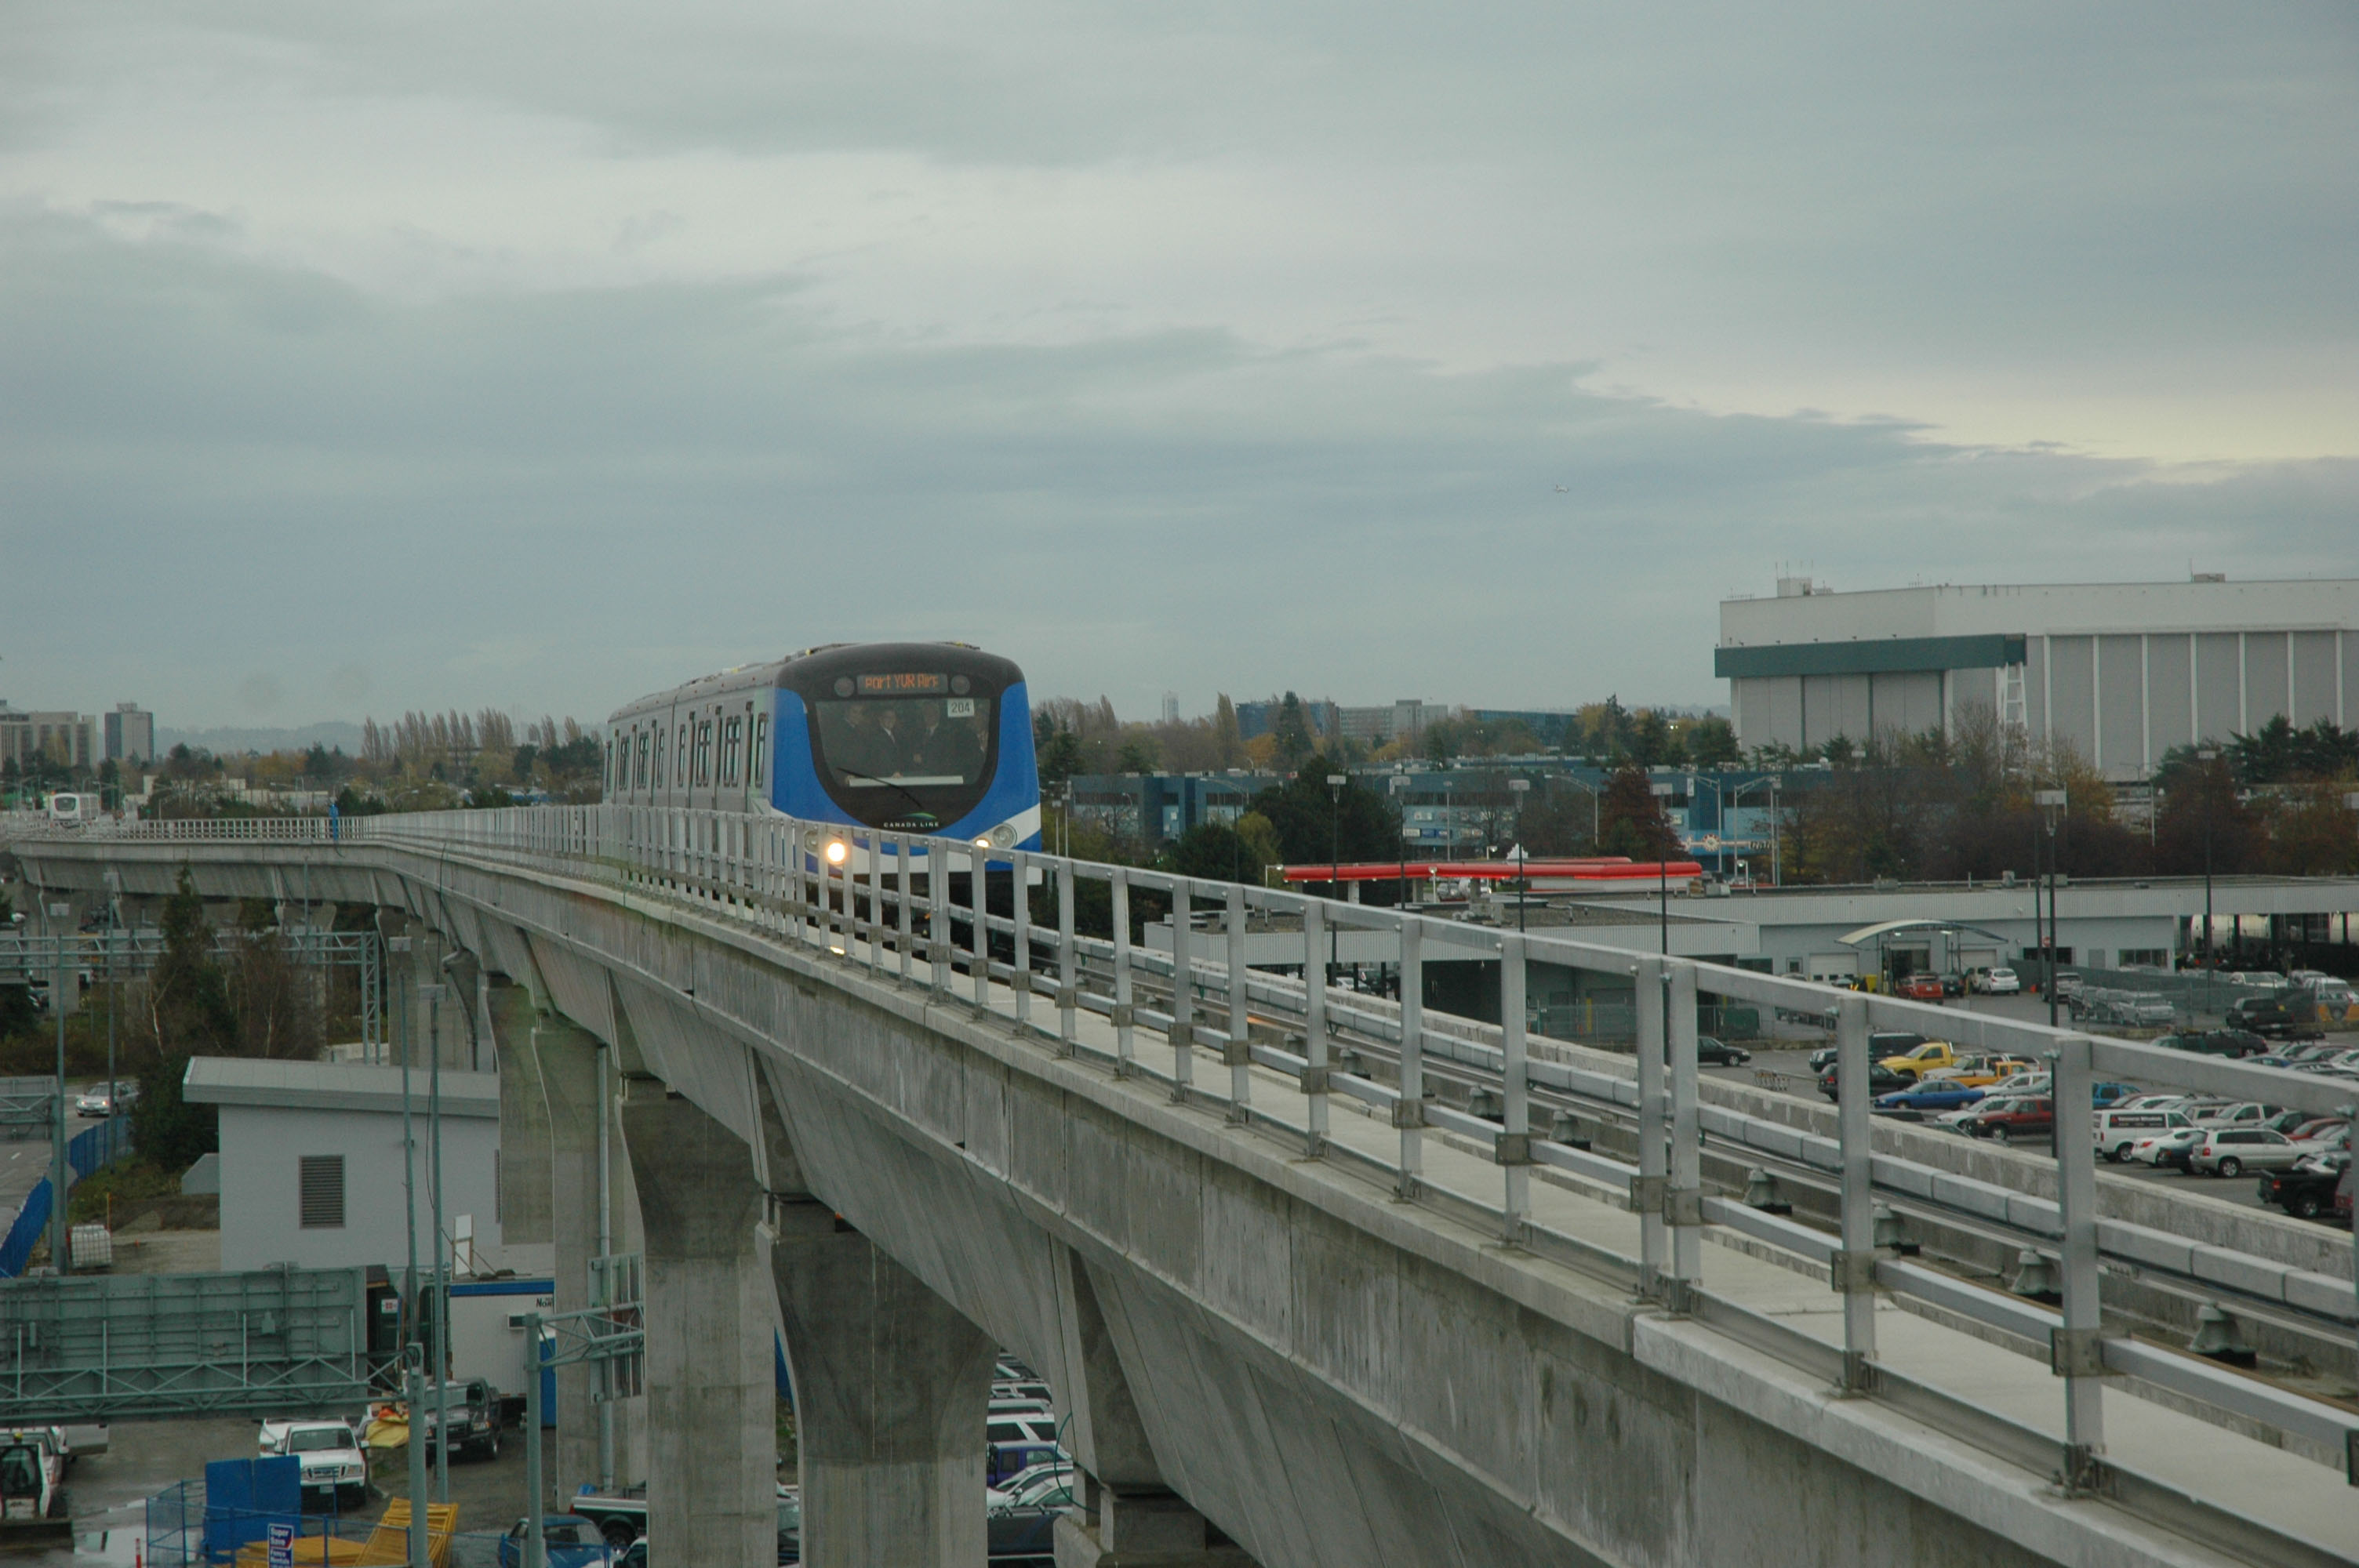 The same Canada Line train a bit earlier in its journey.